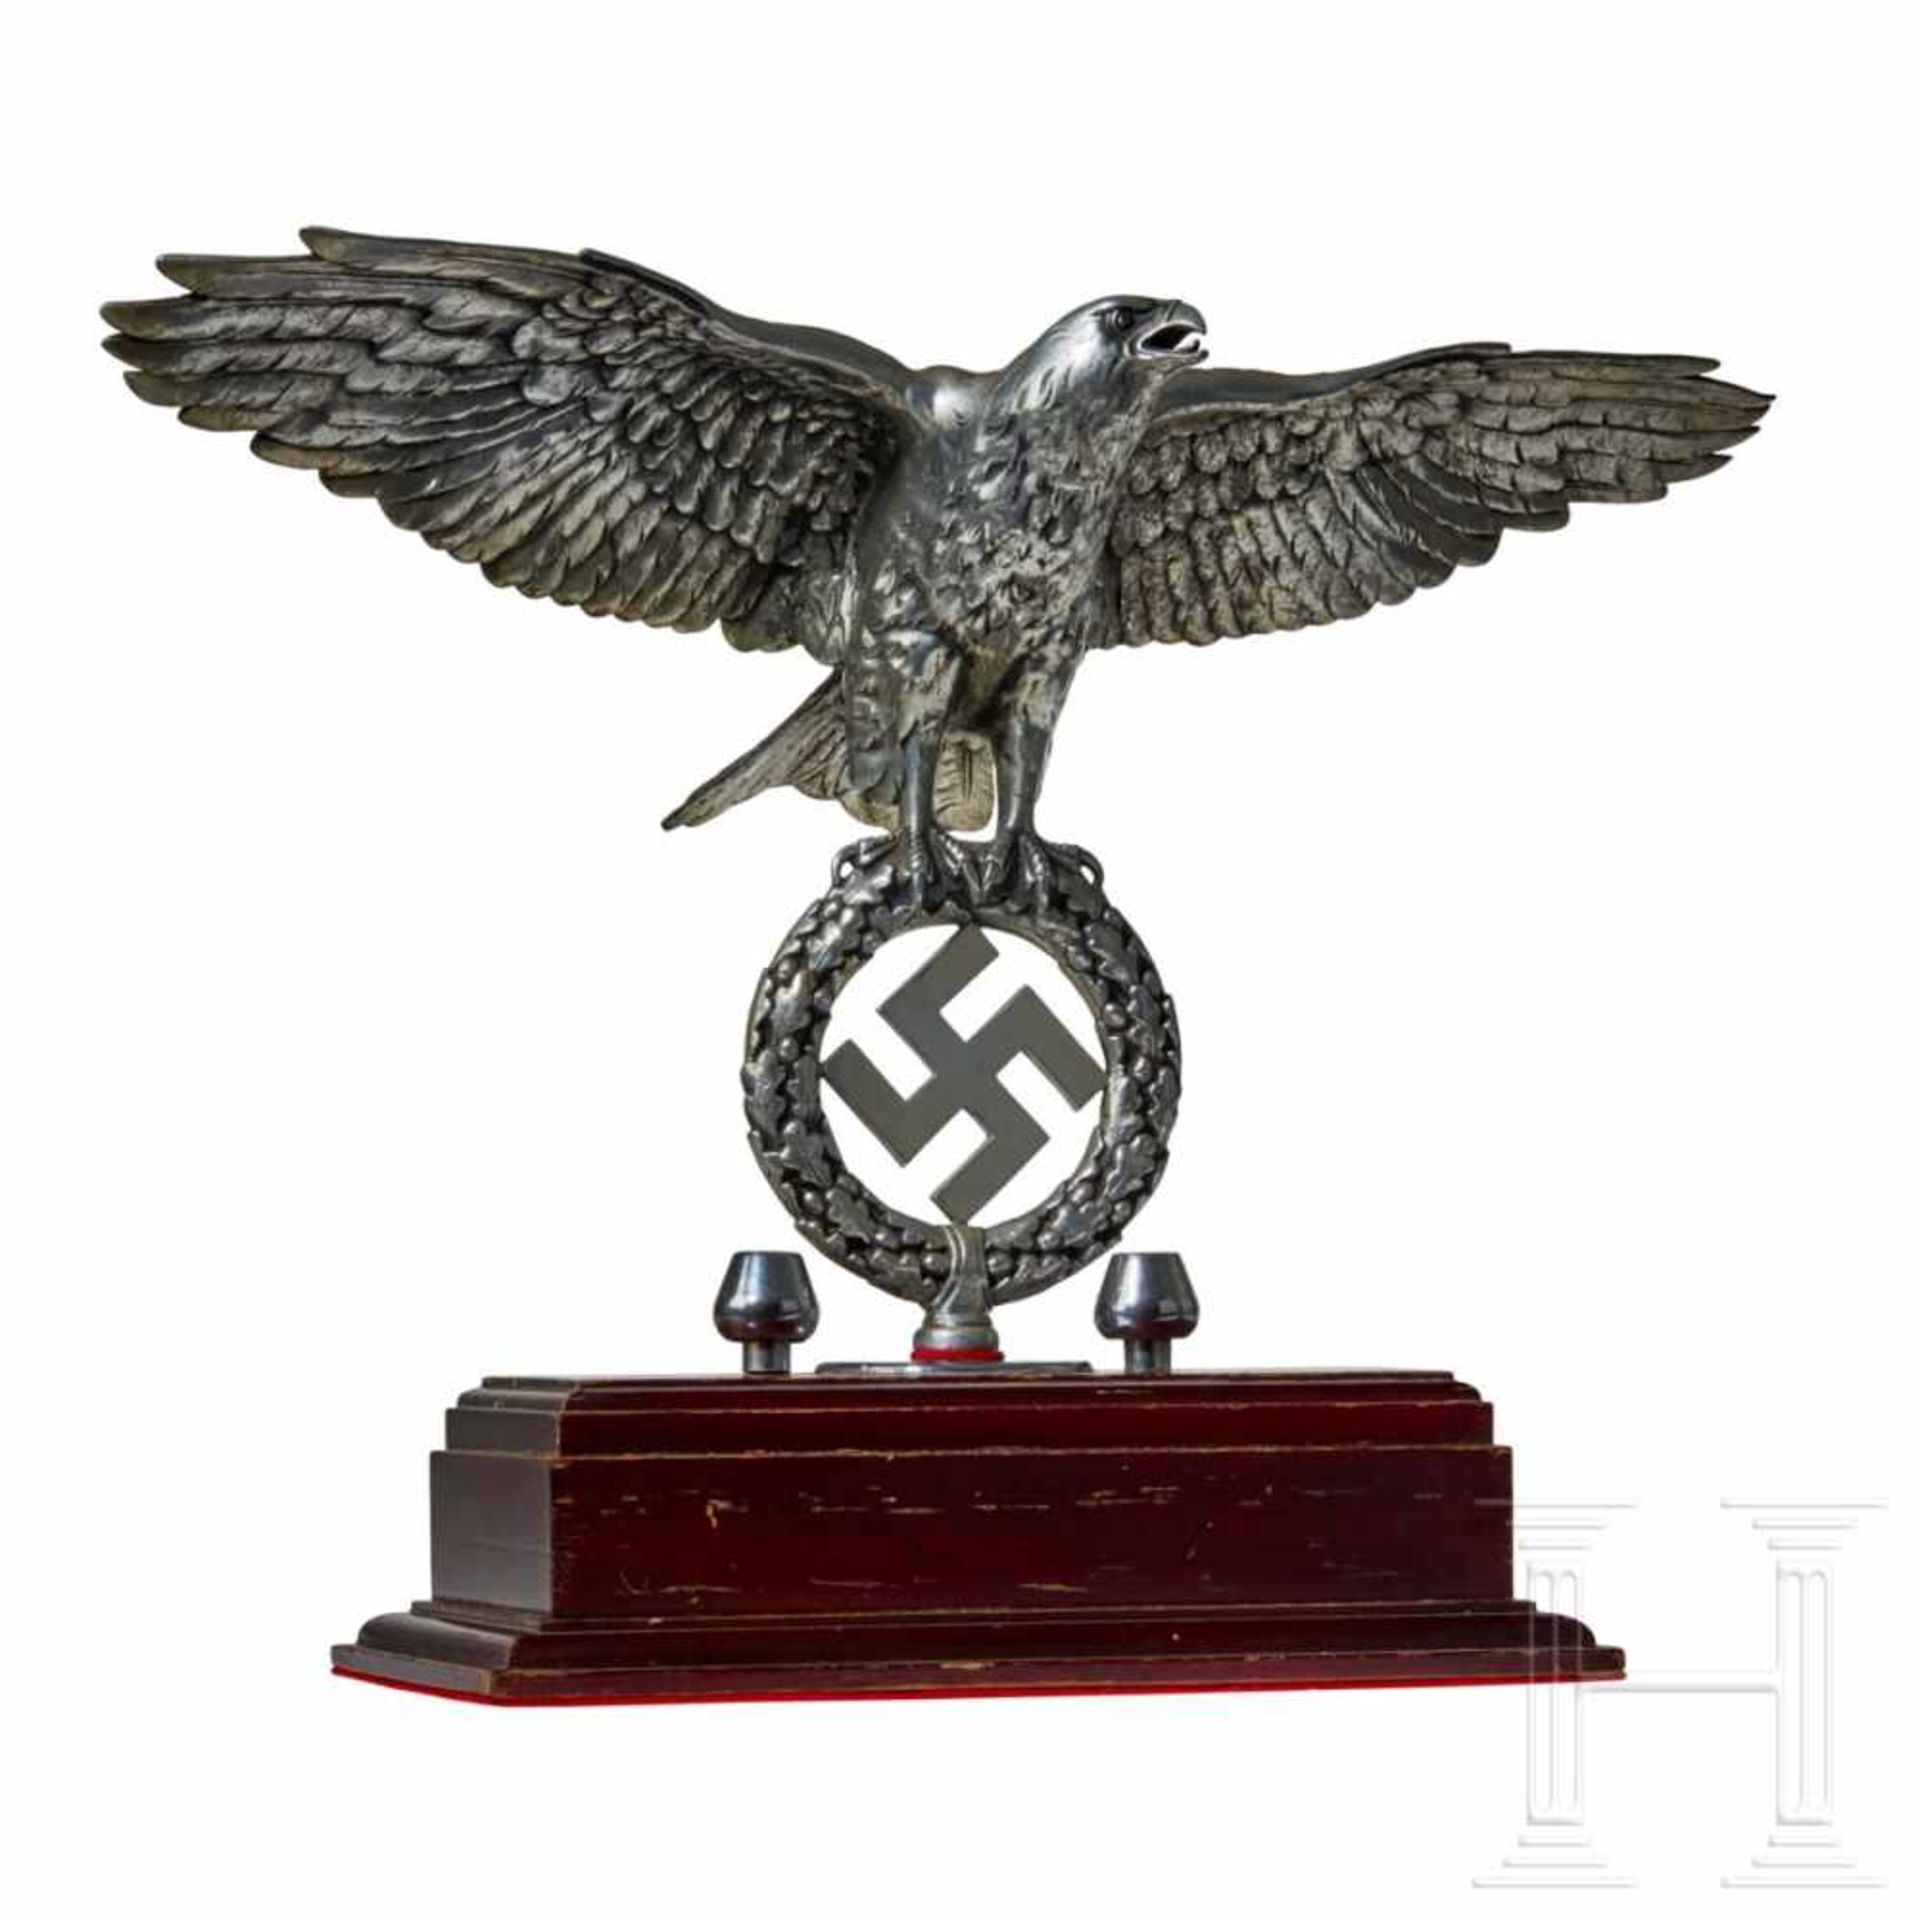 An Eagle for Jingling Johnny (Schellenbaum) of the ArmyPolished aluminum, the eagle with - Bild 2 aus 5